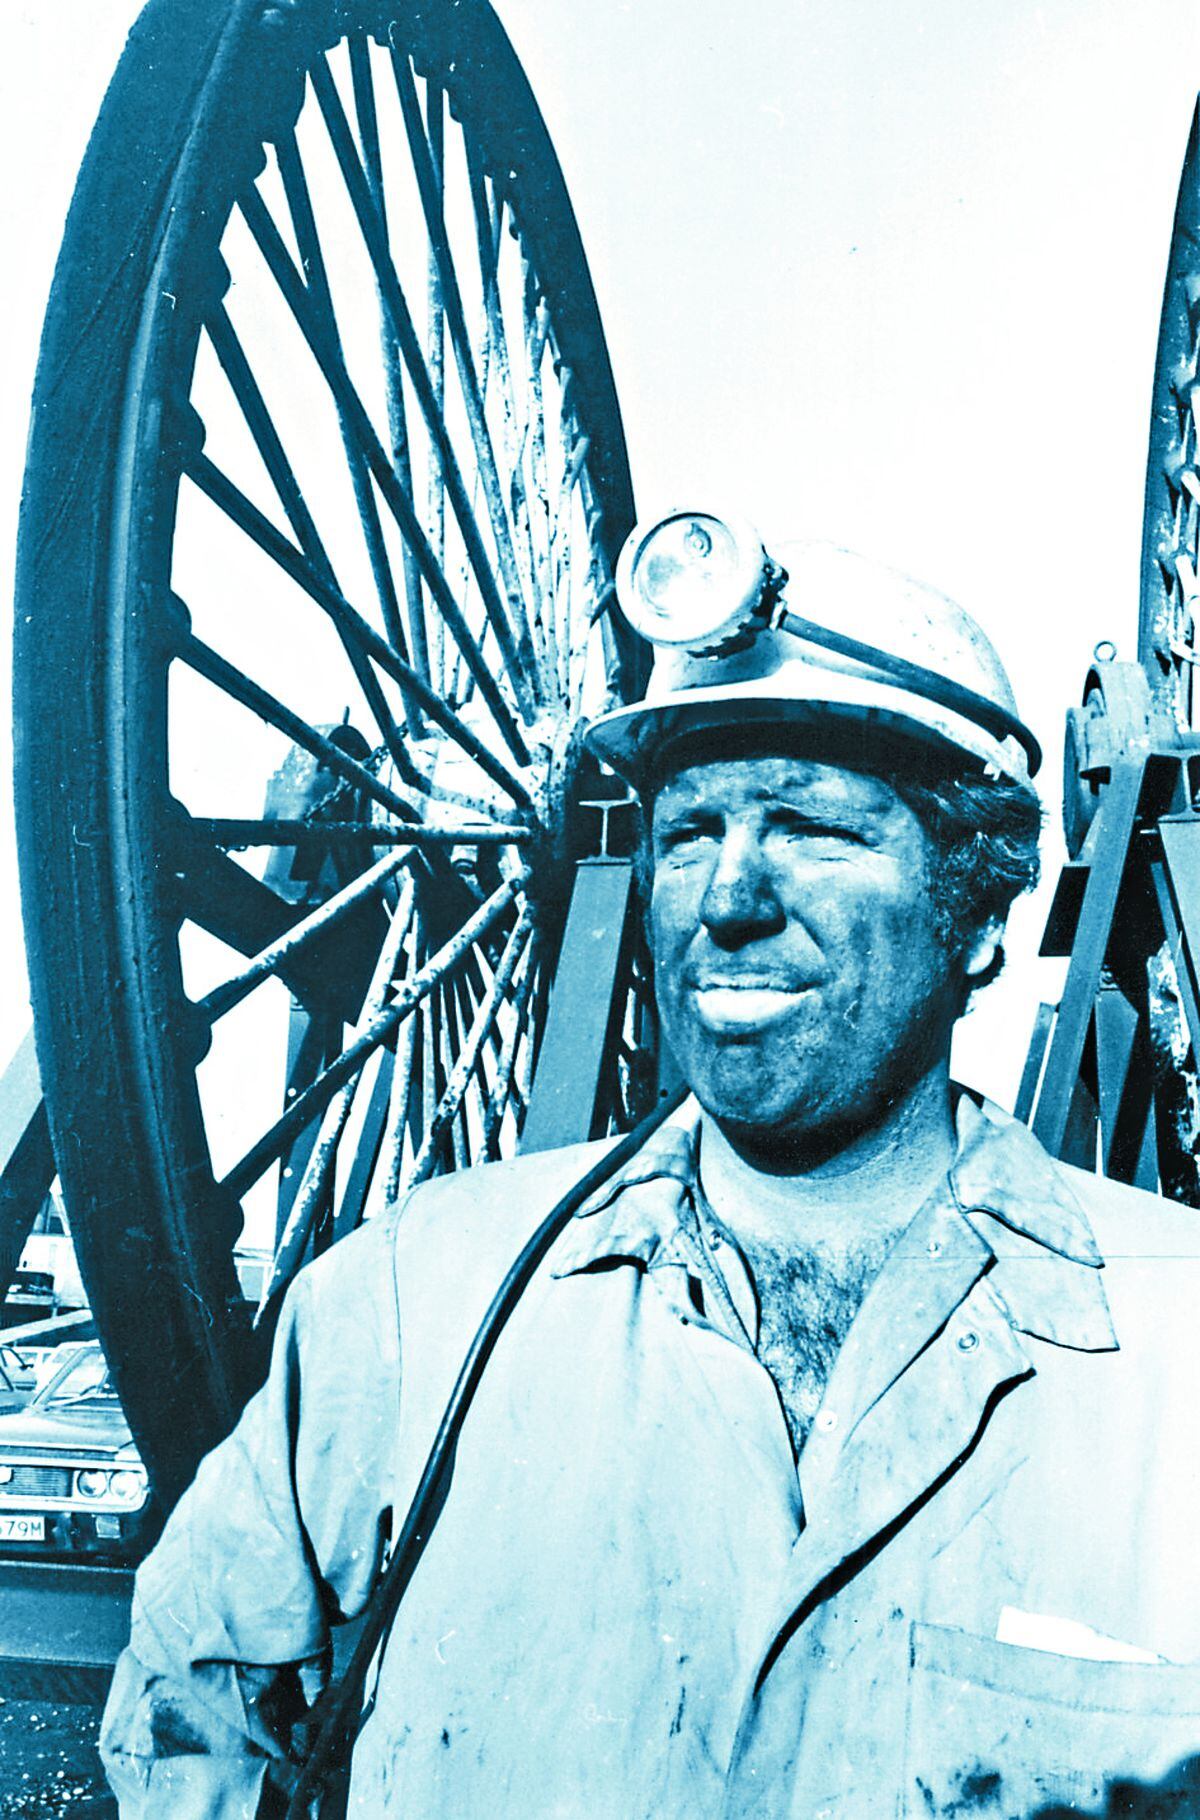 Cannock miner Patrick McLoughlin at the end of his shift at Littleton Colliery in 1982. He later went on to become a cabinet minister in David Cameron's government.